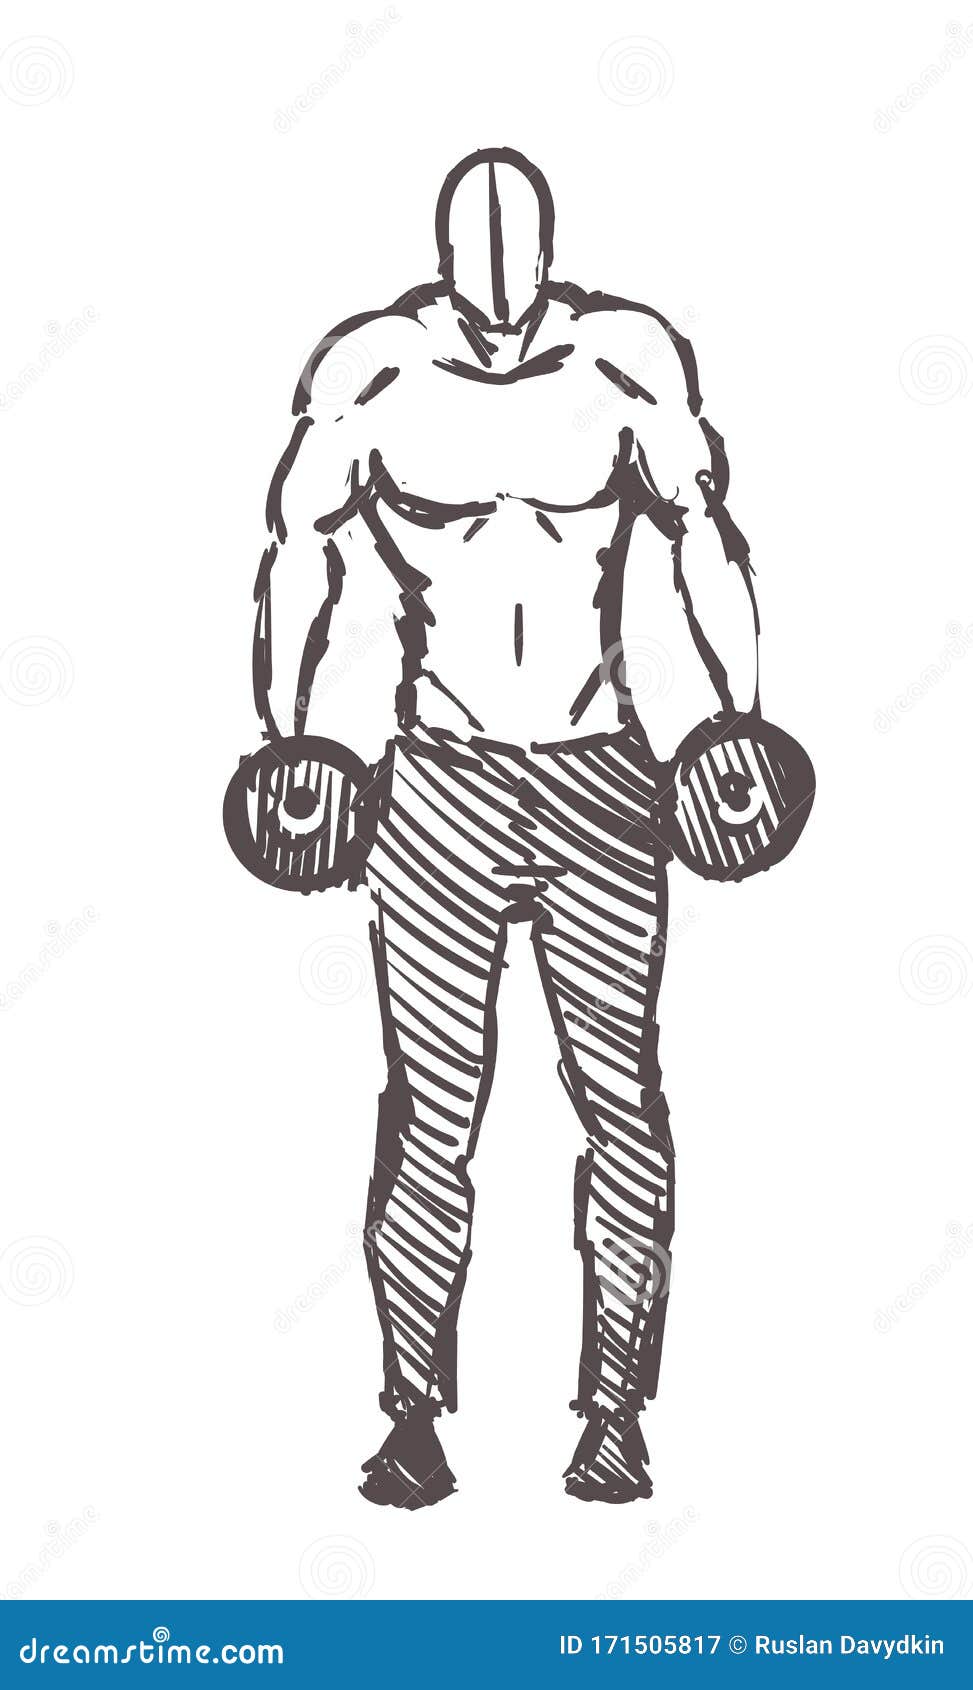 Man Exercises In Calisthenics, Hand Drawn. Street Workout Sketch Vector